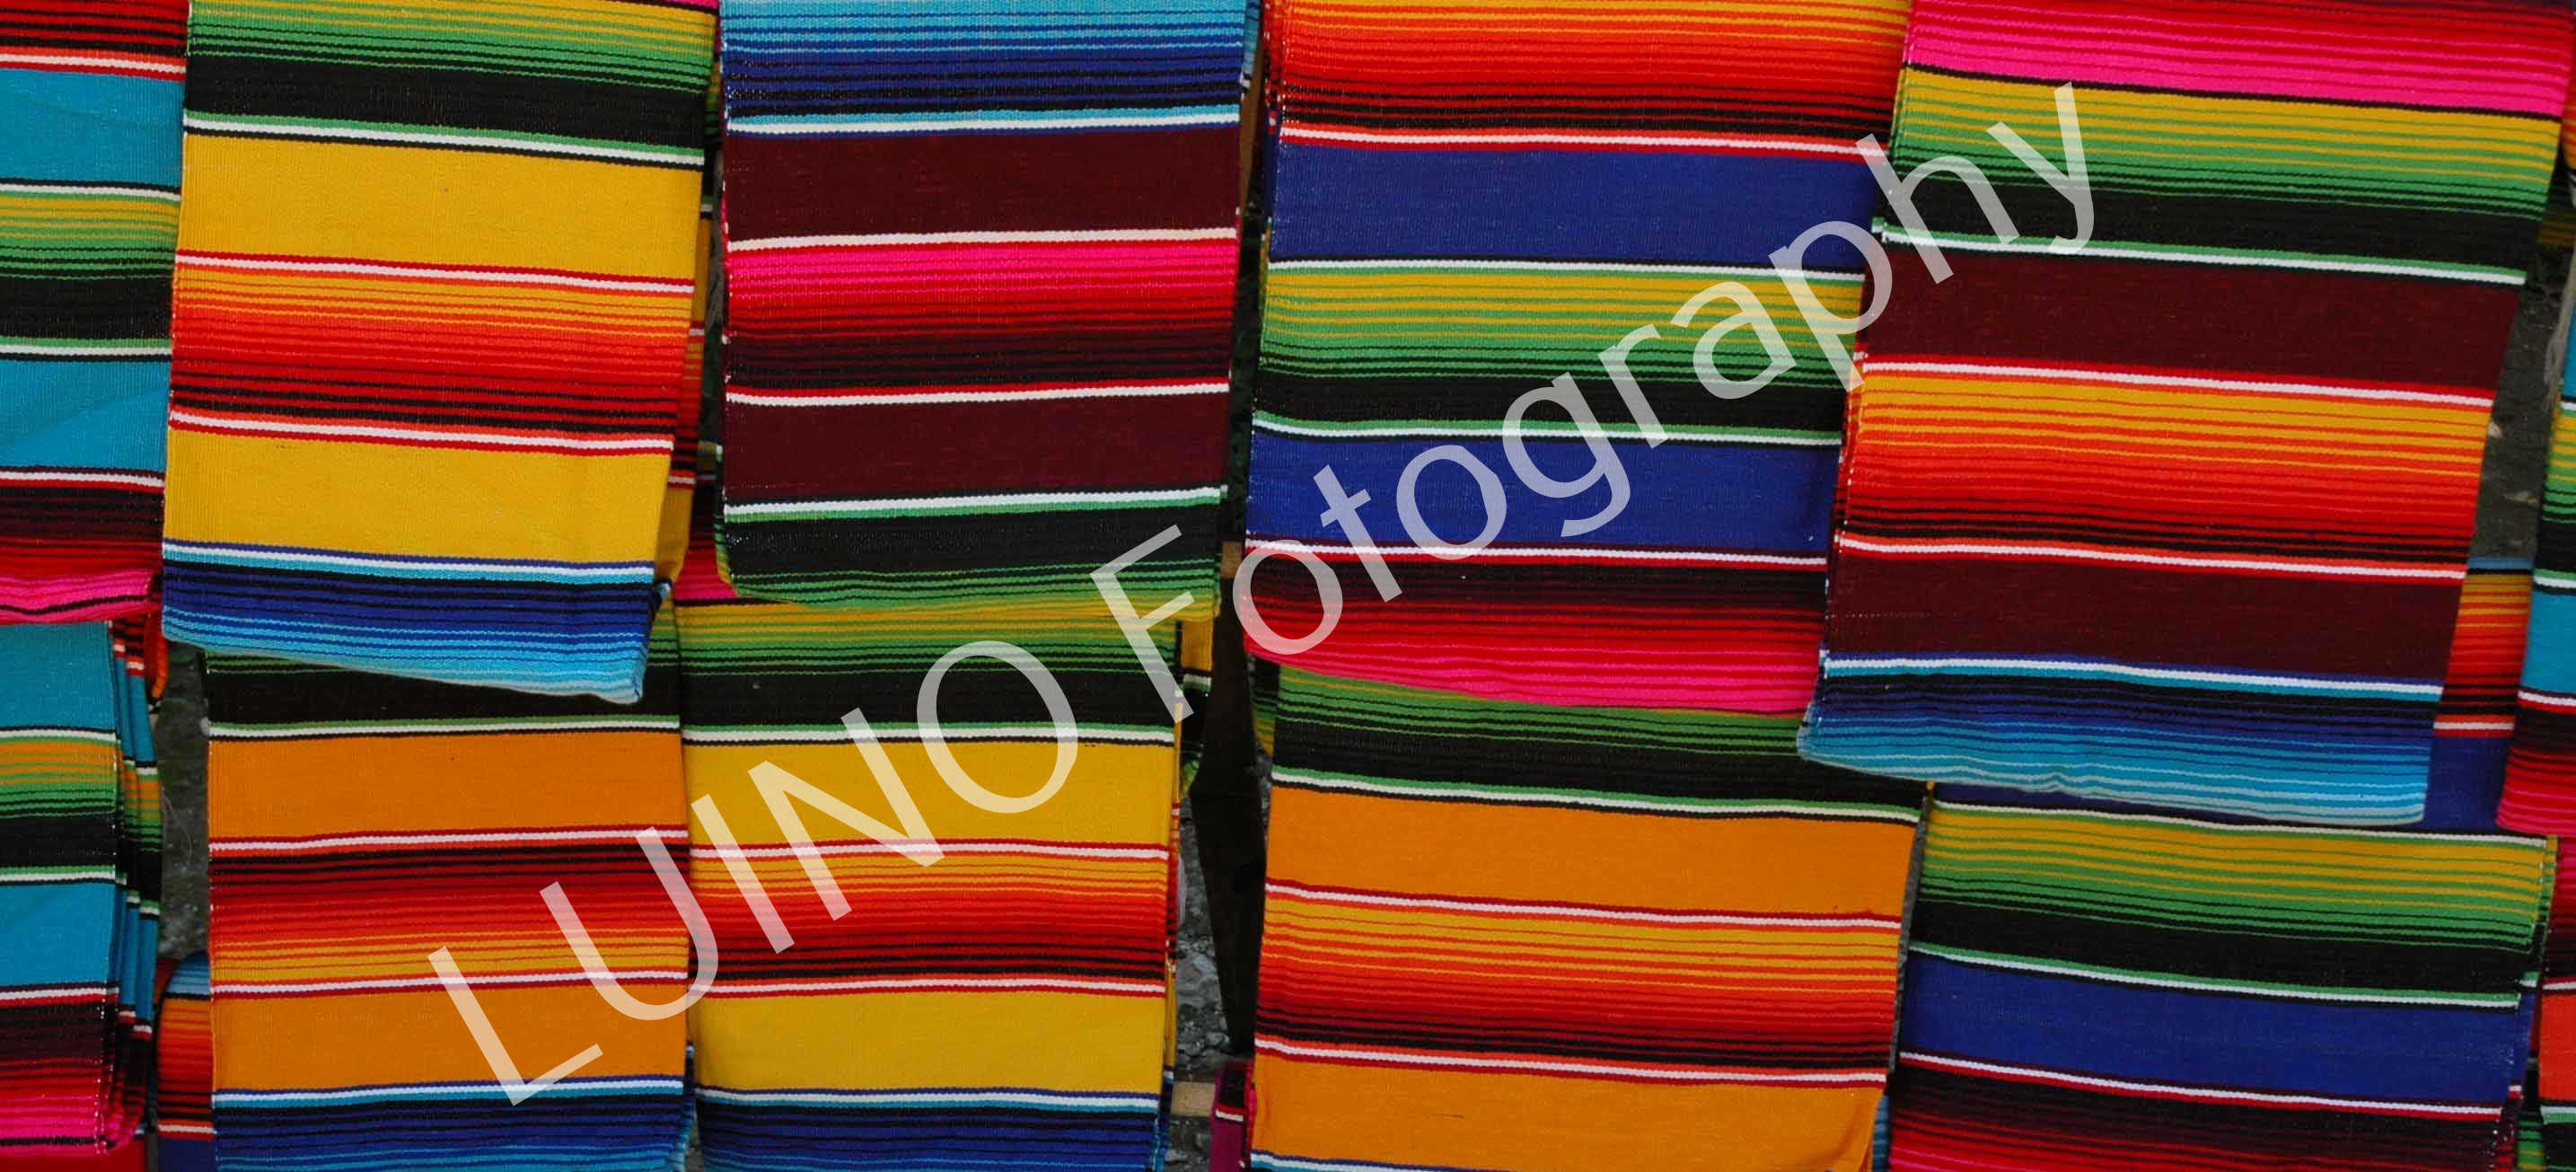 Mexican Blankets